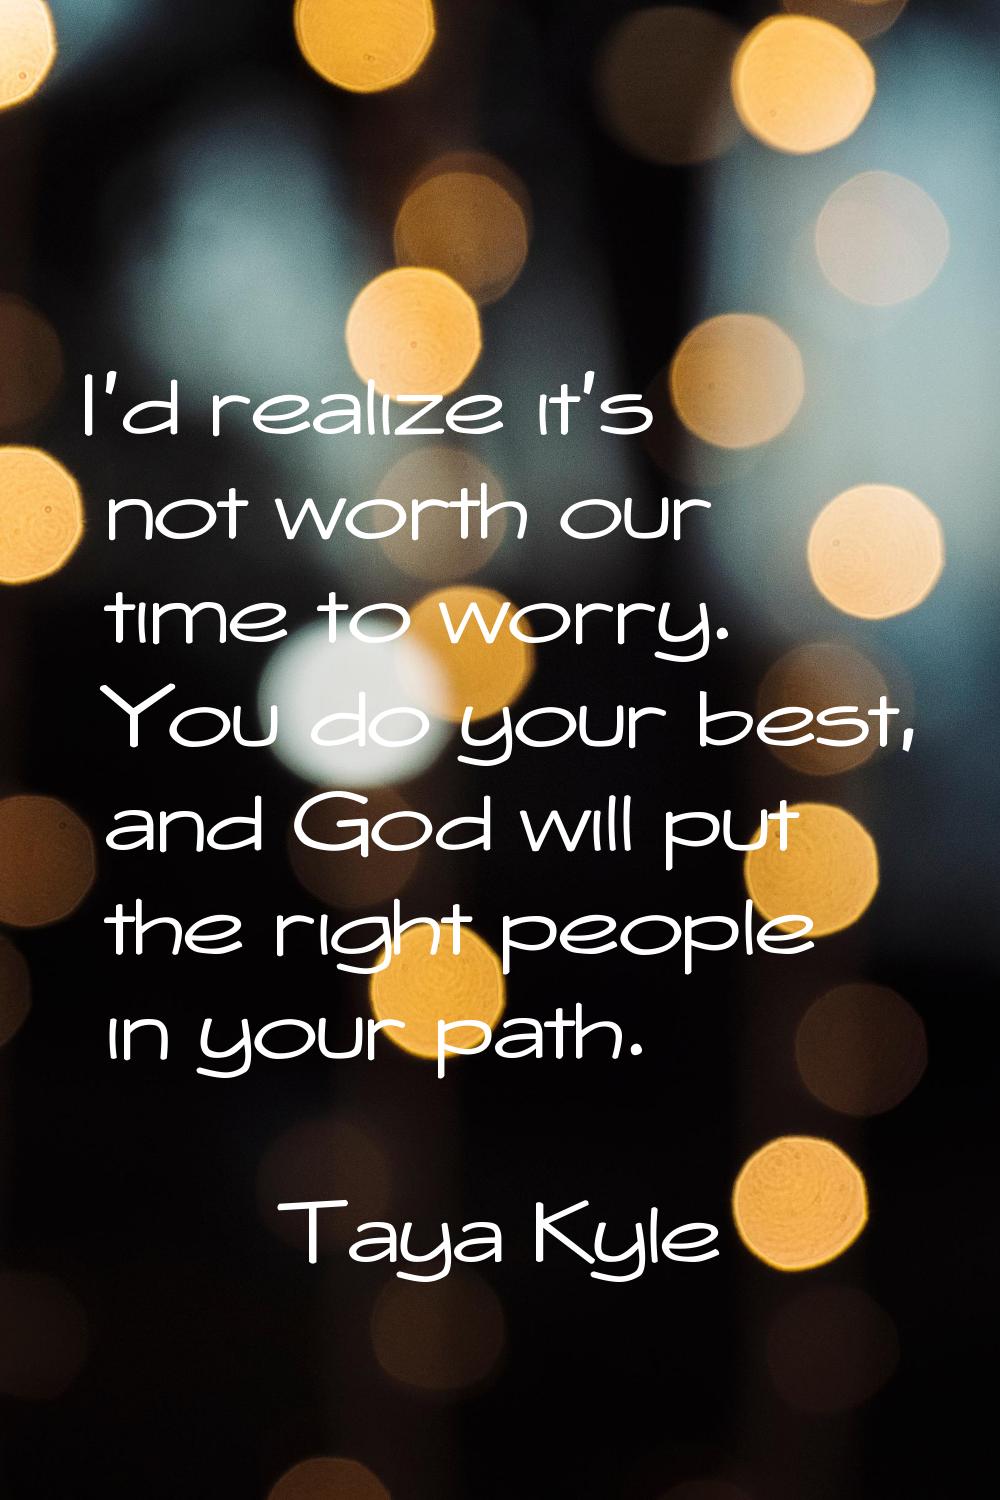 I'd realize it's not worth our time to worry. You do your best, and God will put the right people i